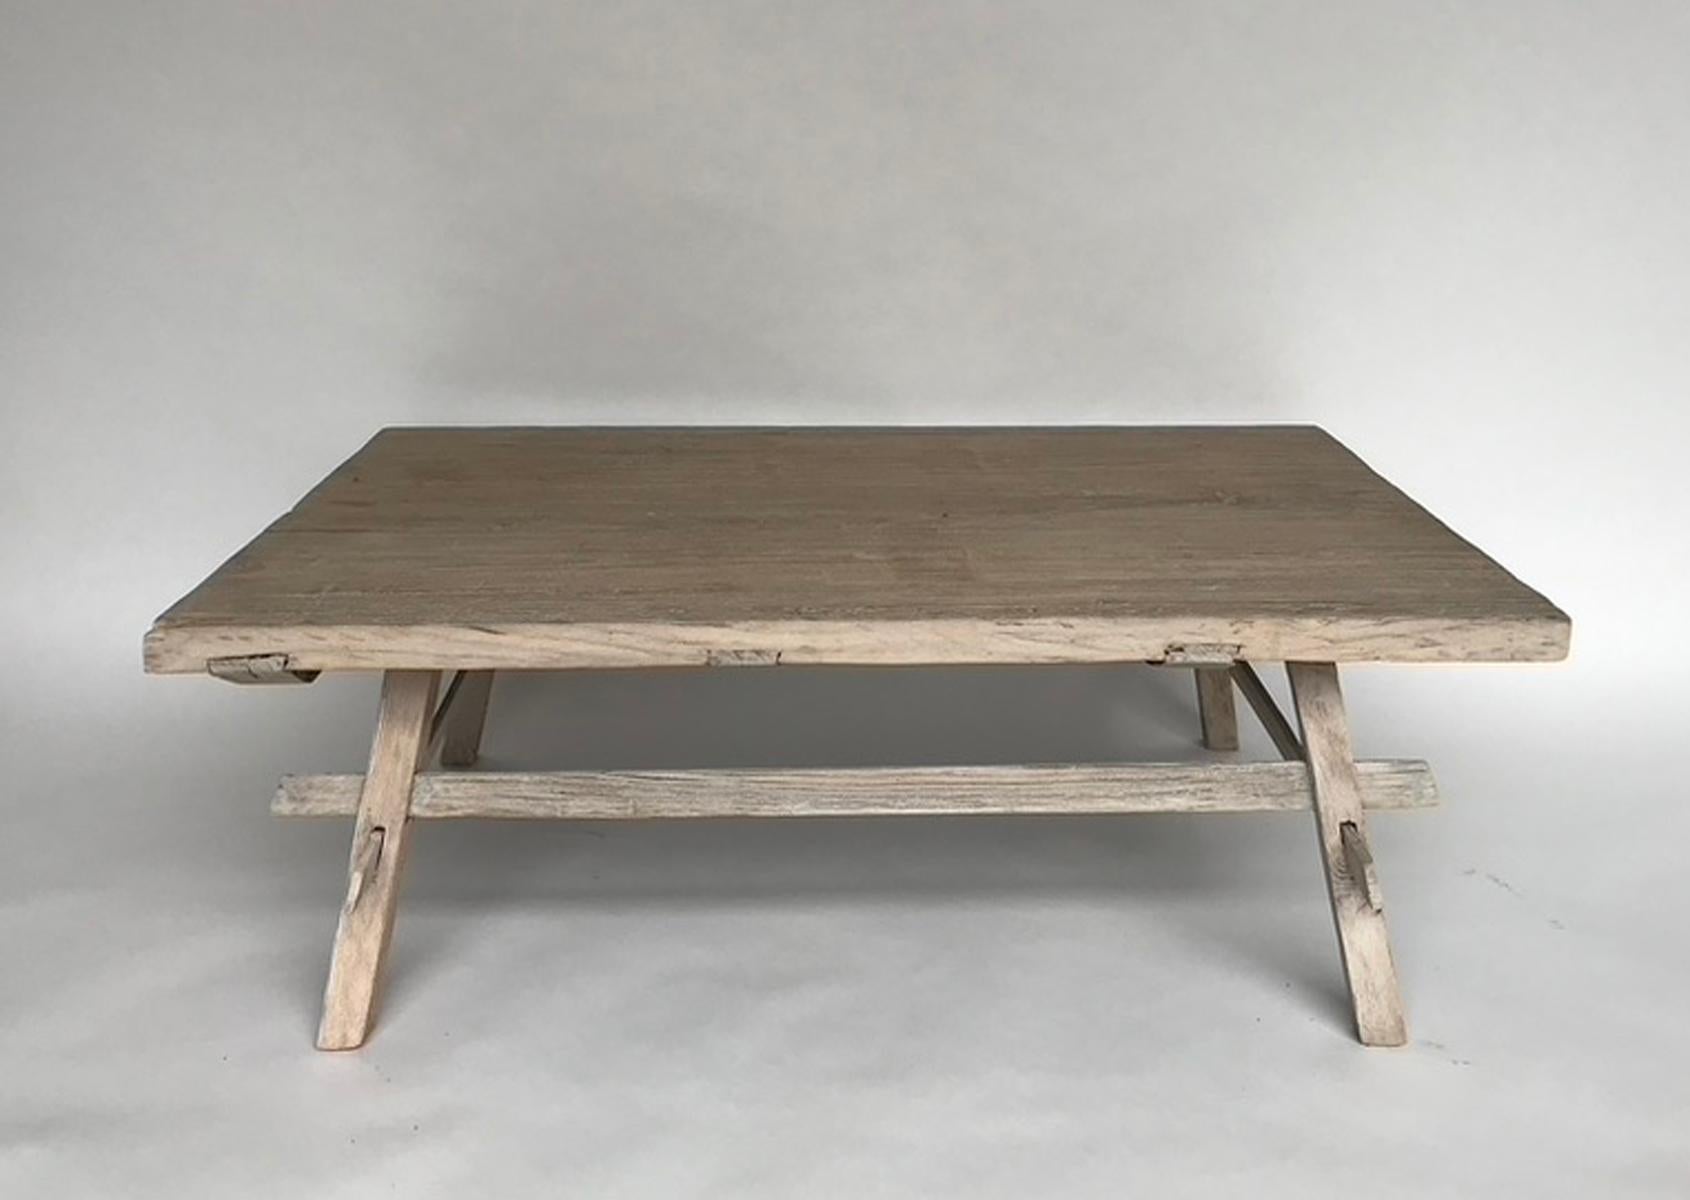 200 Year old, weathered Northern Japanese elm was used to make this rustic coffee table, featuring a base with stretchers. Naturally distressed wood throughout and lovely grayish/beige patina, like driftwood. Solid new construction.